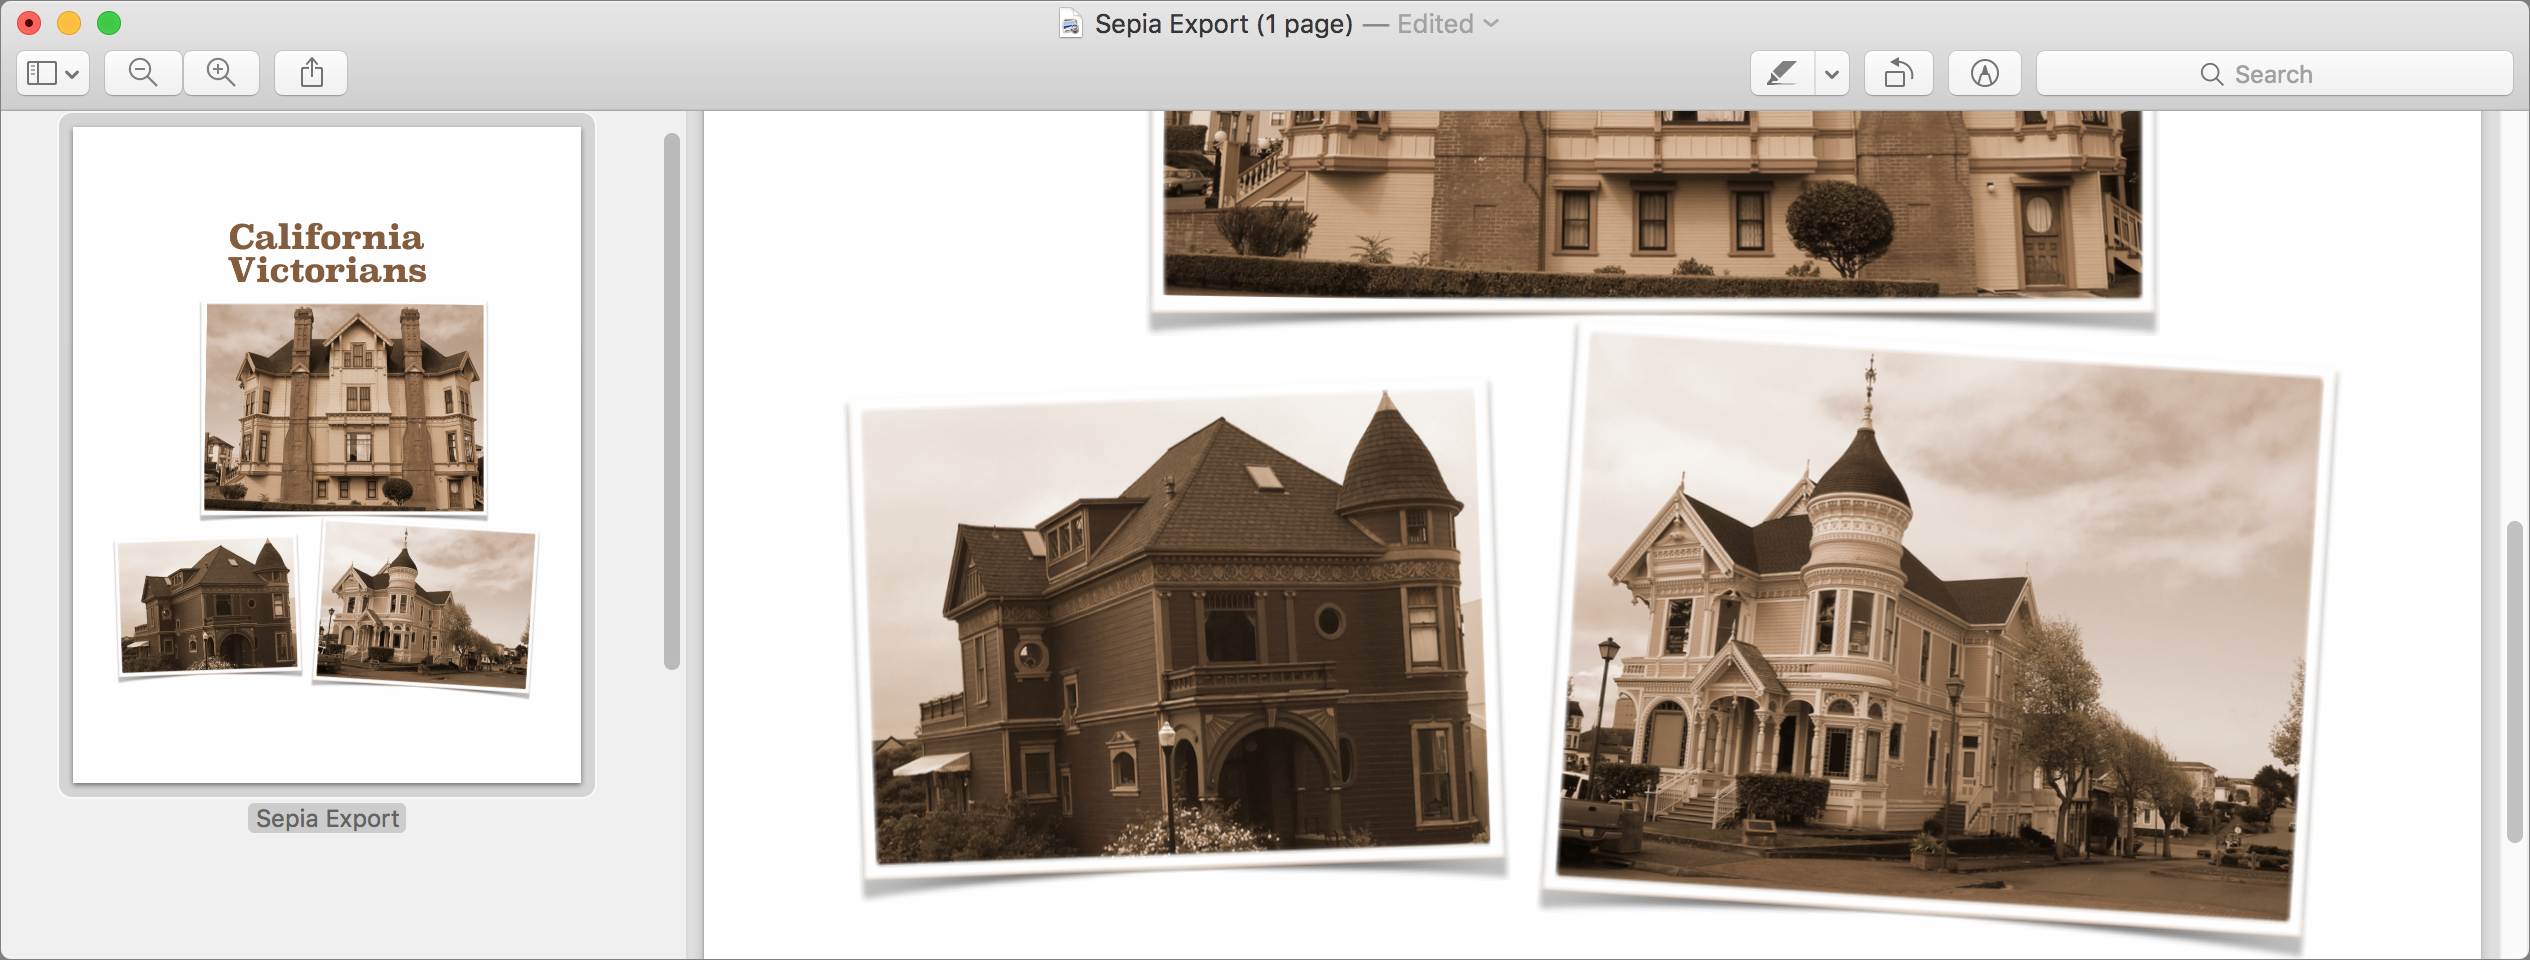 Figure 102: The Sepia Quartz filter applies an old-timey effect to the exported PDF.